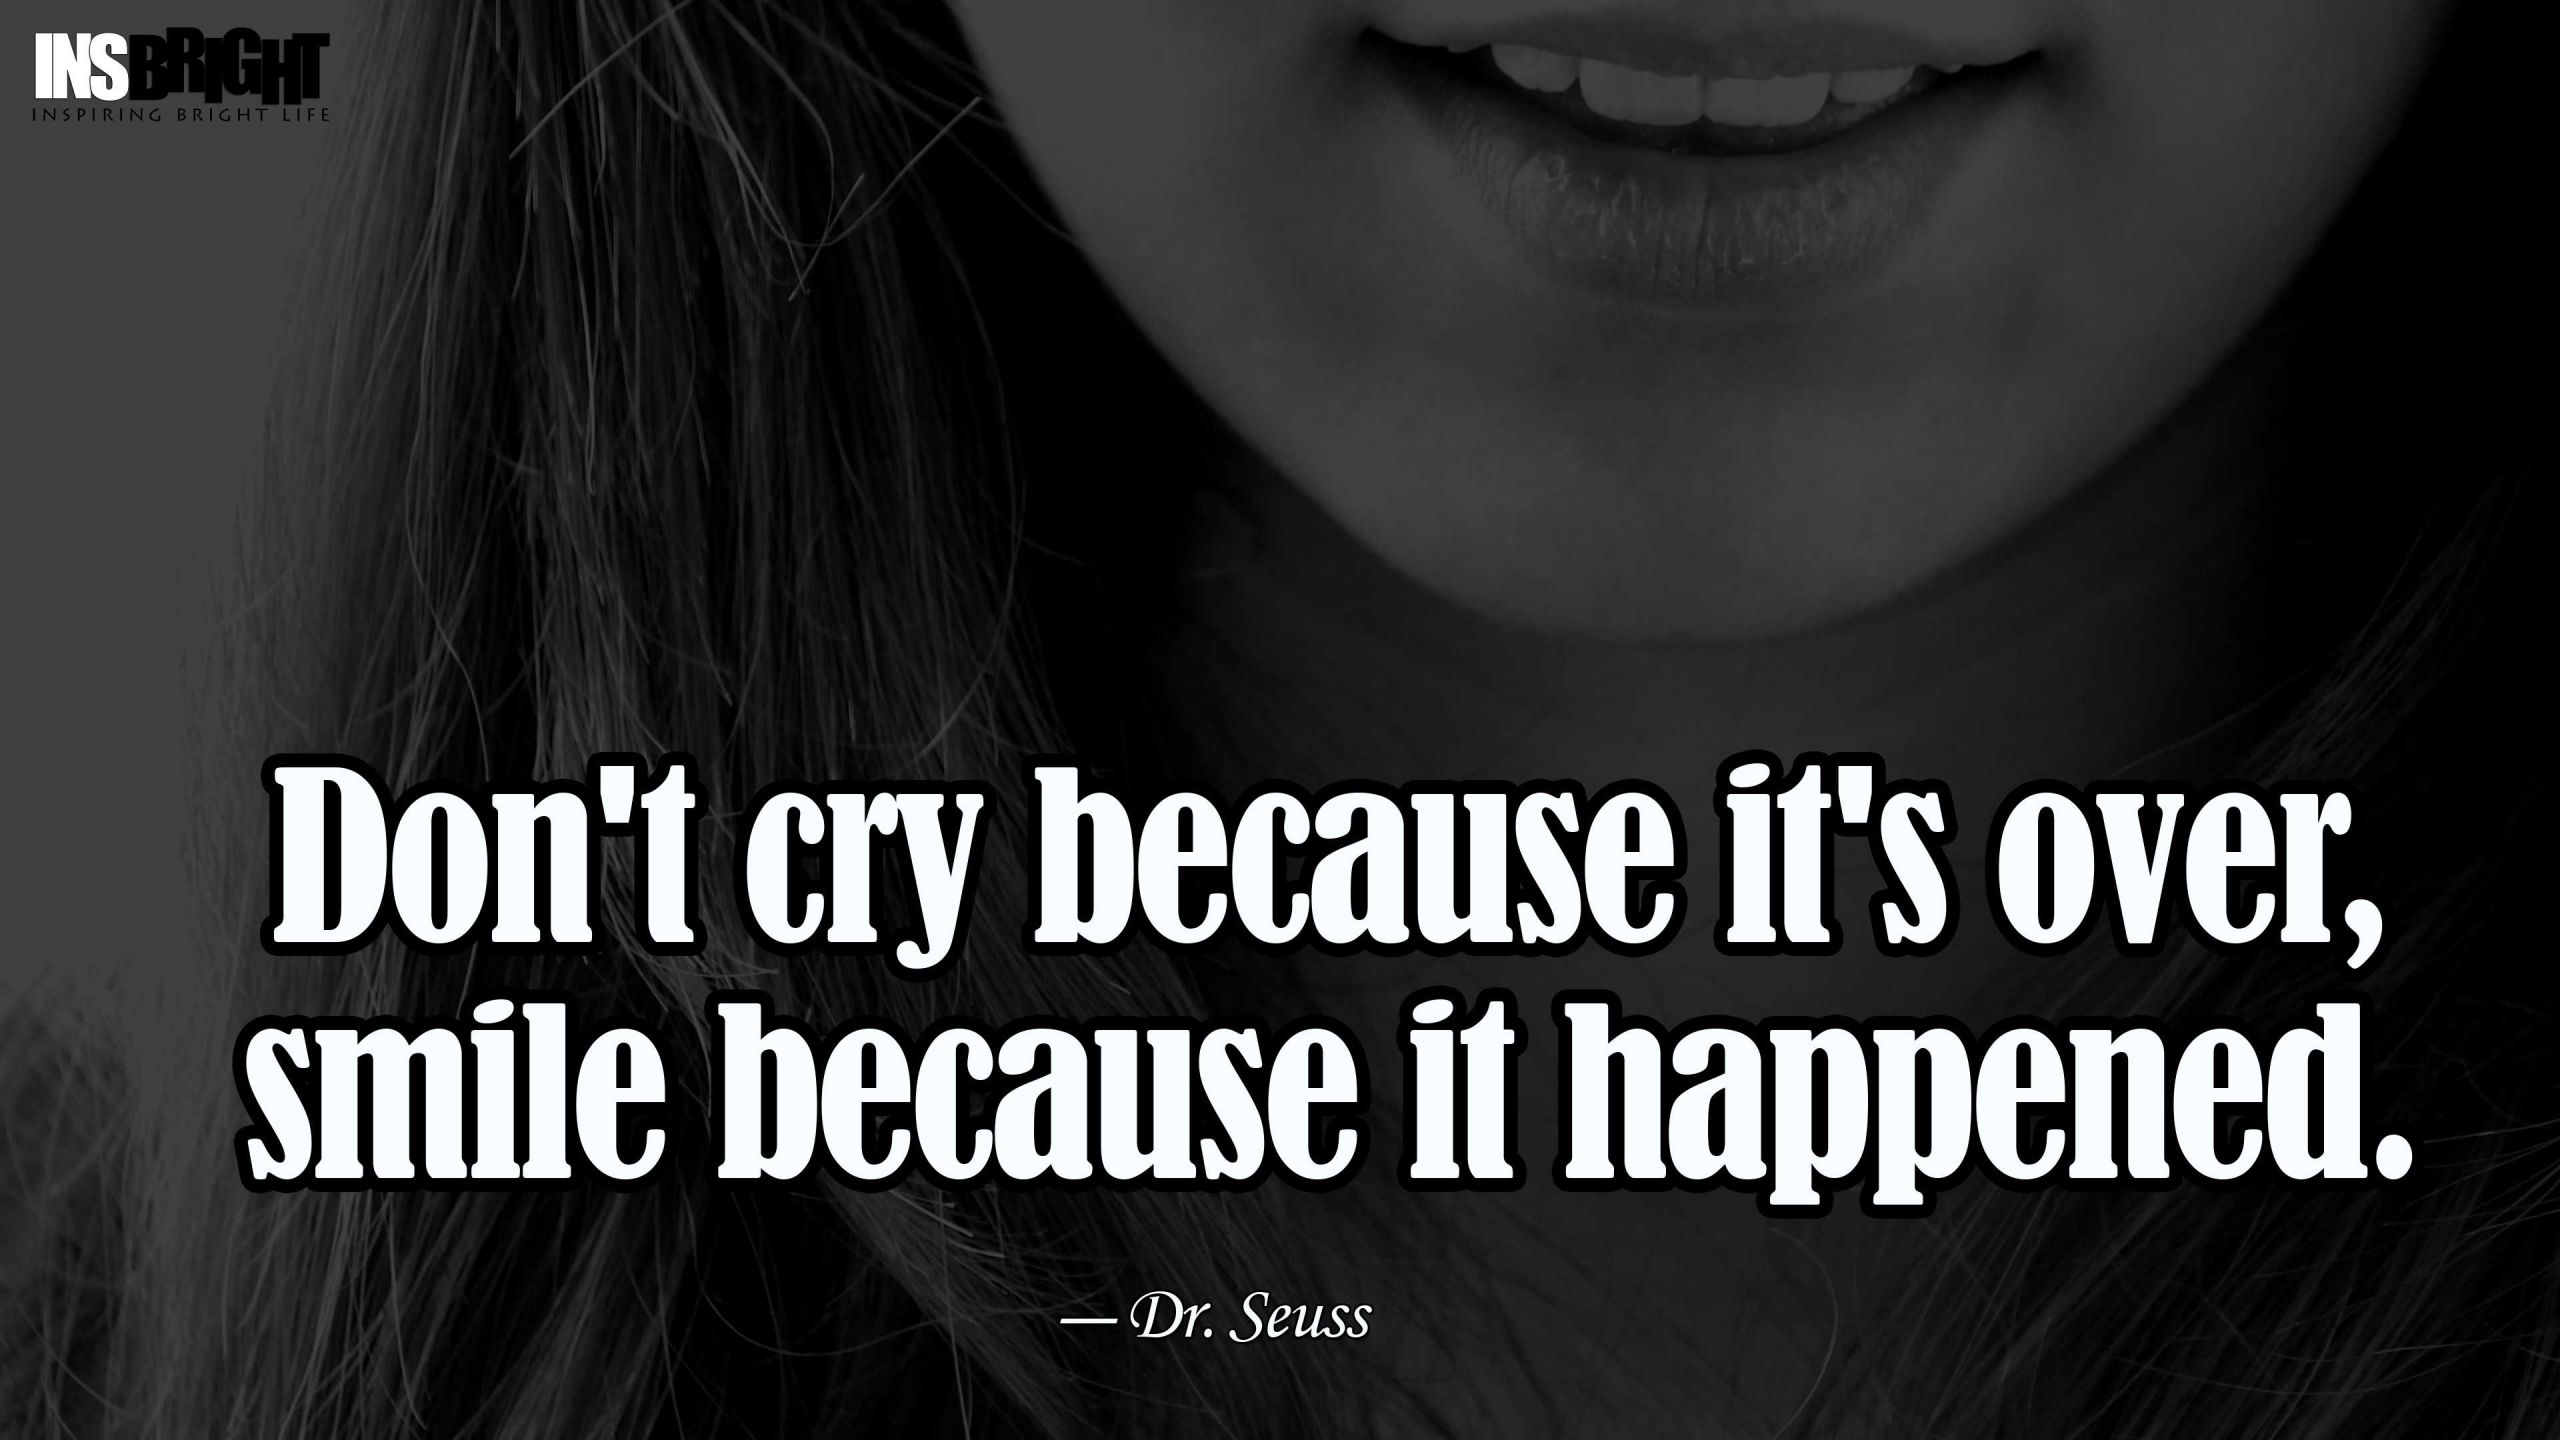 Dont Be Sad Quotes
 14 Inspirational Don t Be Sad Quotes